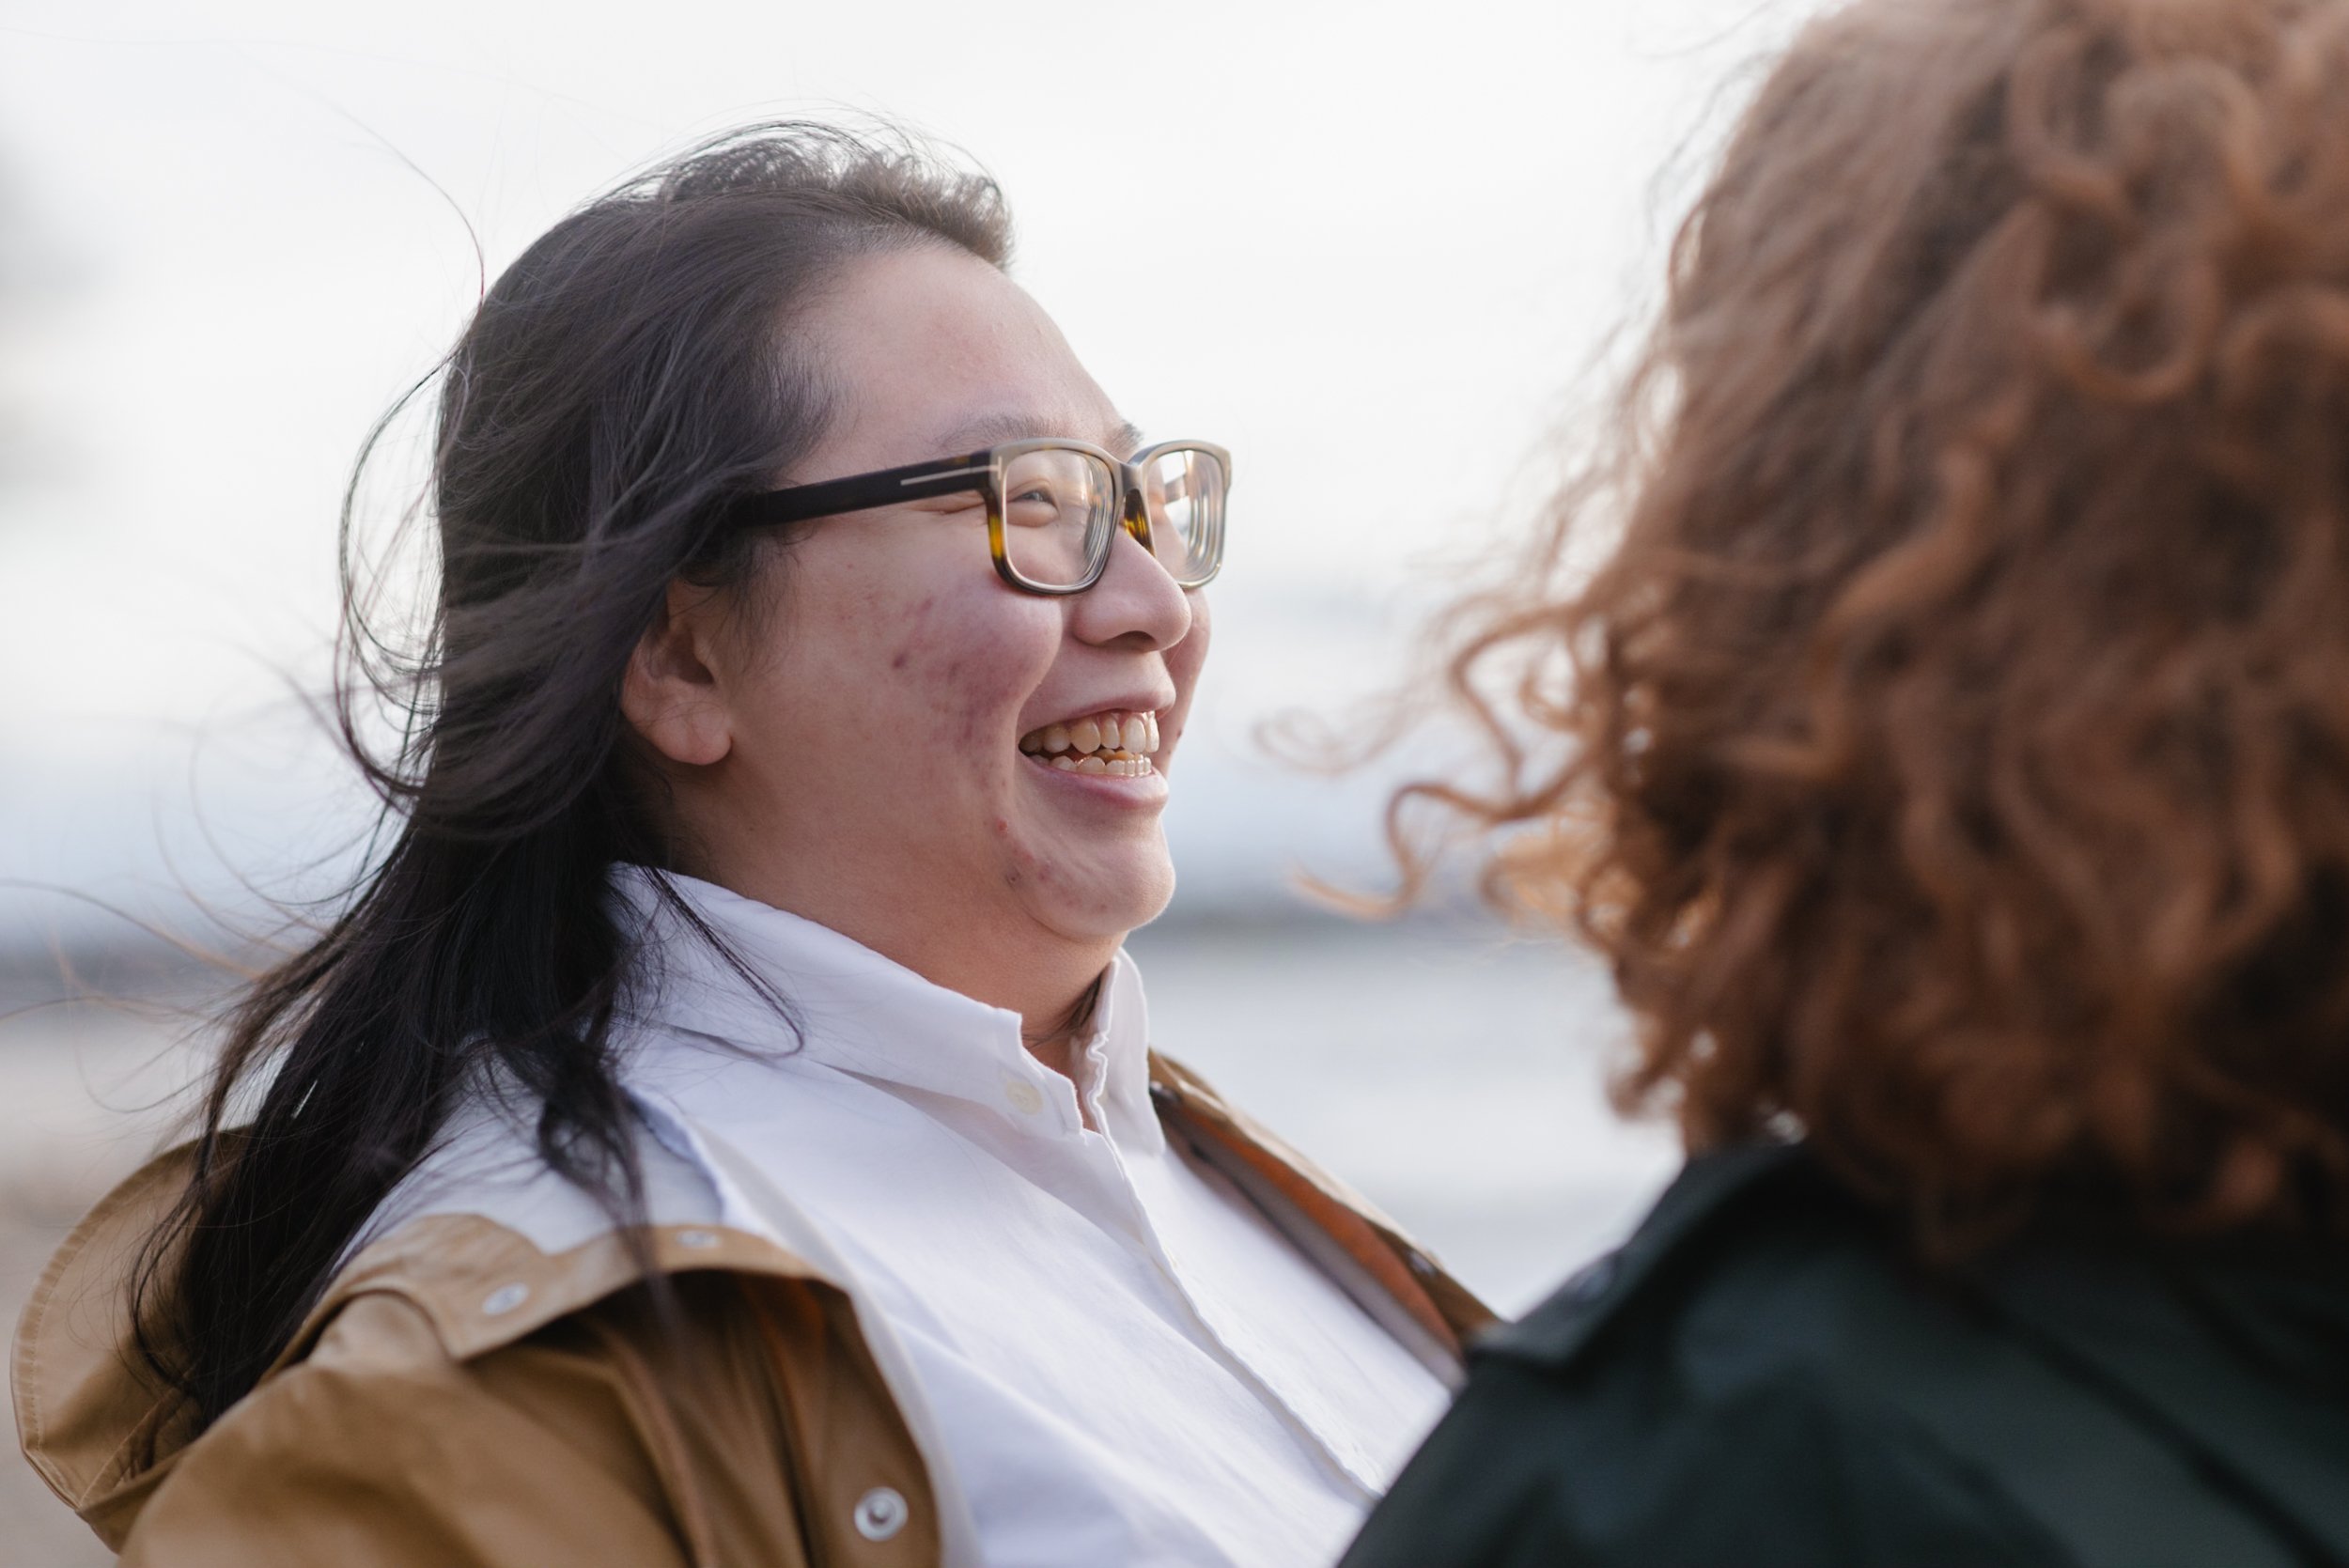 Woman with glasses smiling at partner